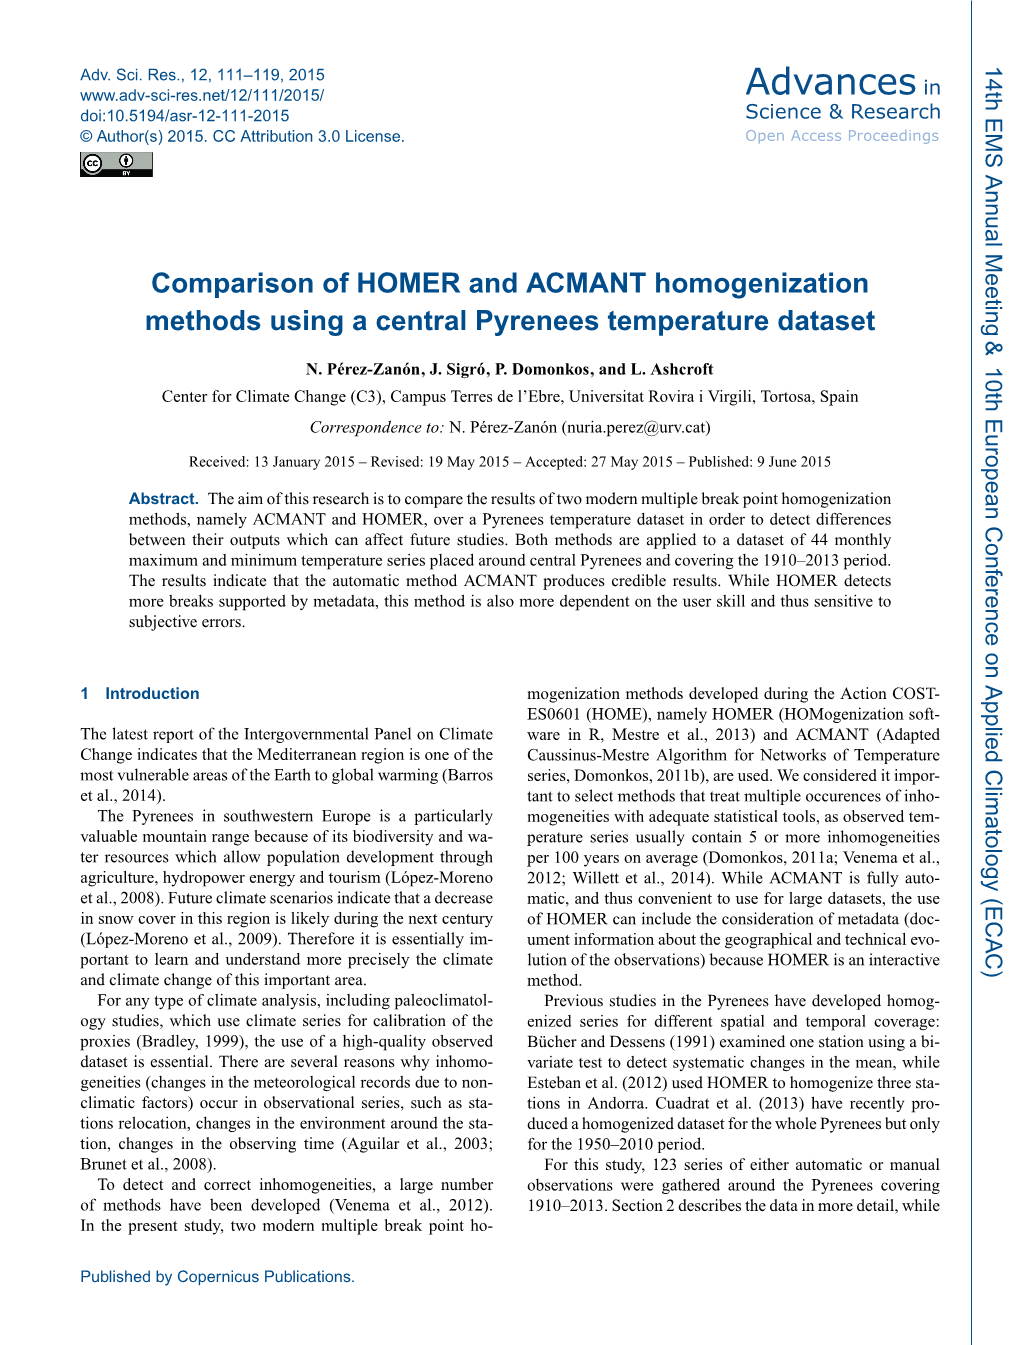 Comparison of HOMER and ACMANT Homogenization Methods Using a Central Pyrenees Temperature Dataset